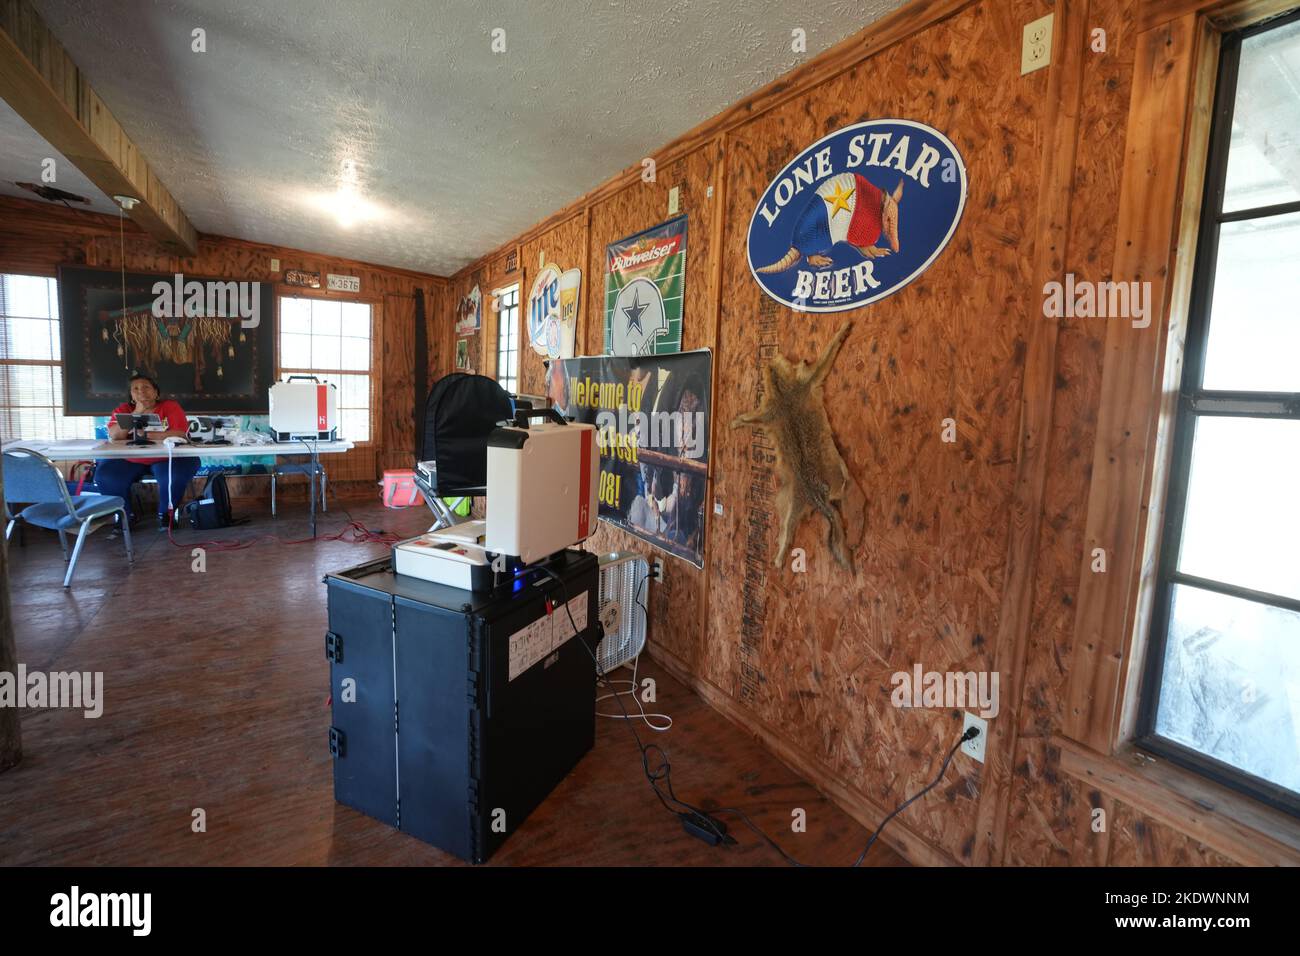 Live Oak County Texas USA, November 8 2022: A poll worker waits in the old barbecue joint Ray's outside of Alice, Texas for voters to arrive during the midterm elections in rural south Texas. The business has been closed about 15 years and is used regularly as a rural polling place. Credit: Bob Daemmrich/Alamy Live News Stock Photo